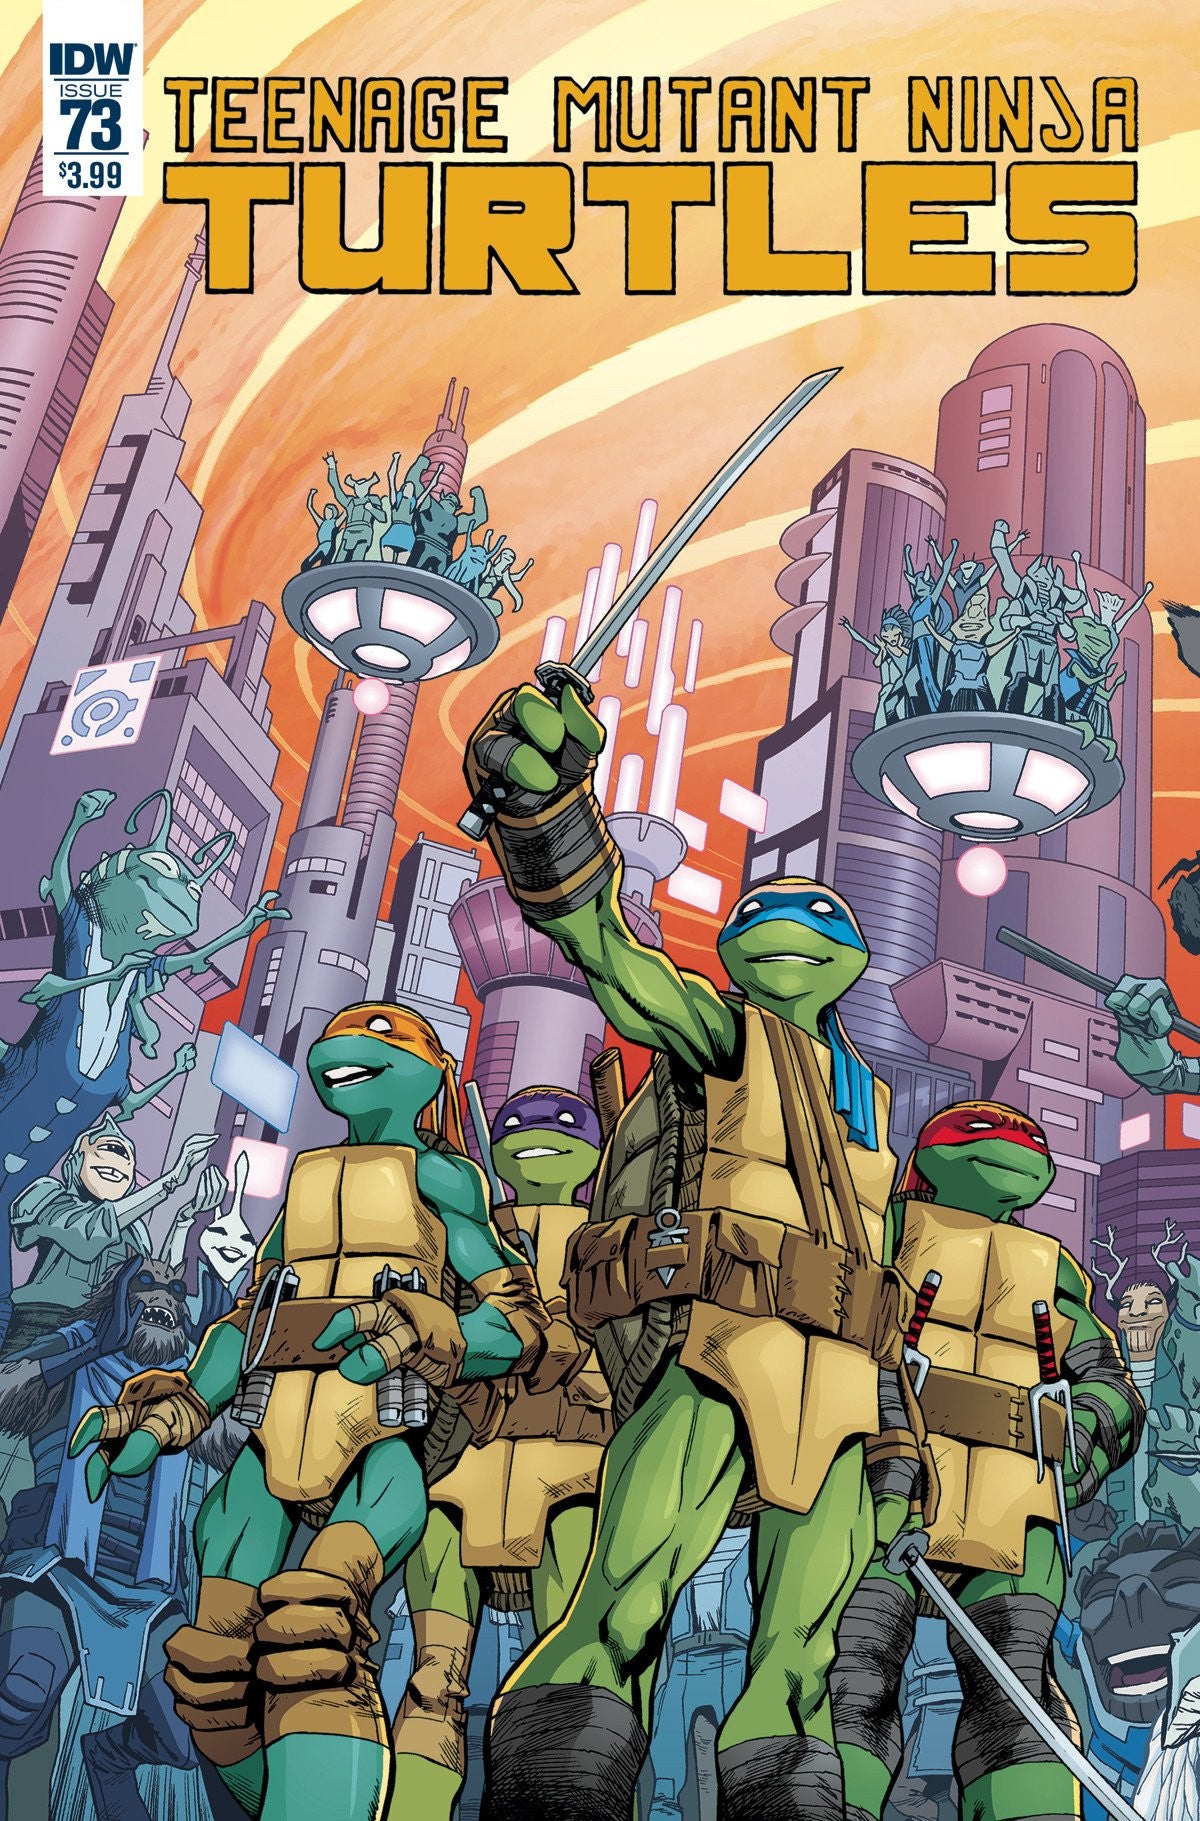 TMNT ONGOING #73 CVR A SMITH COVER